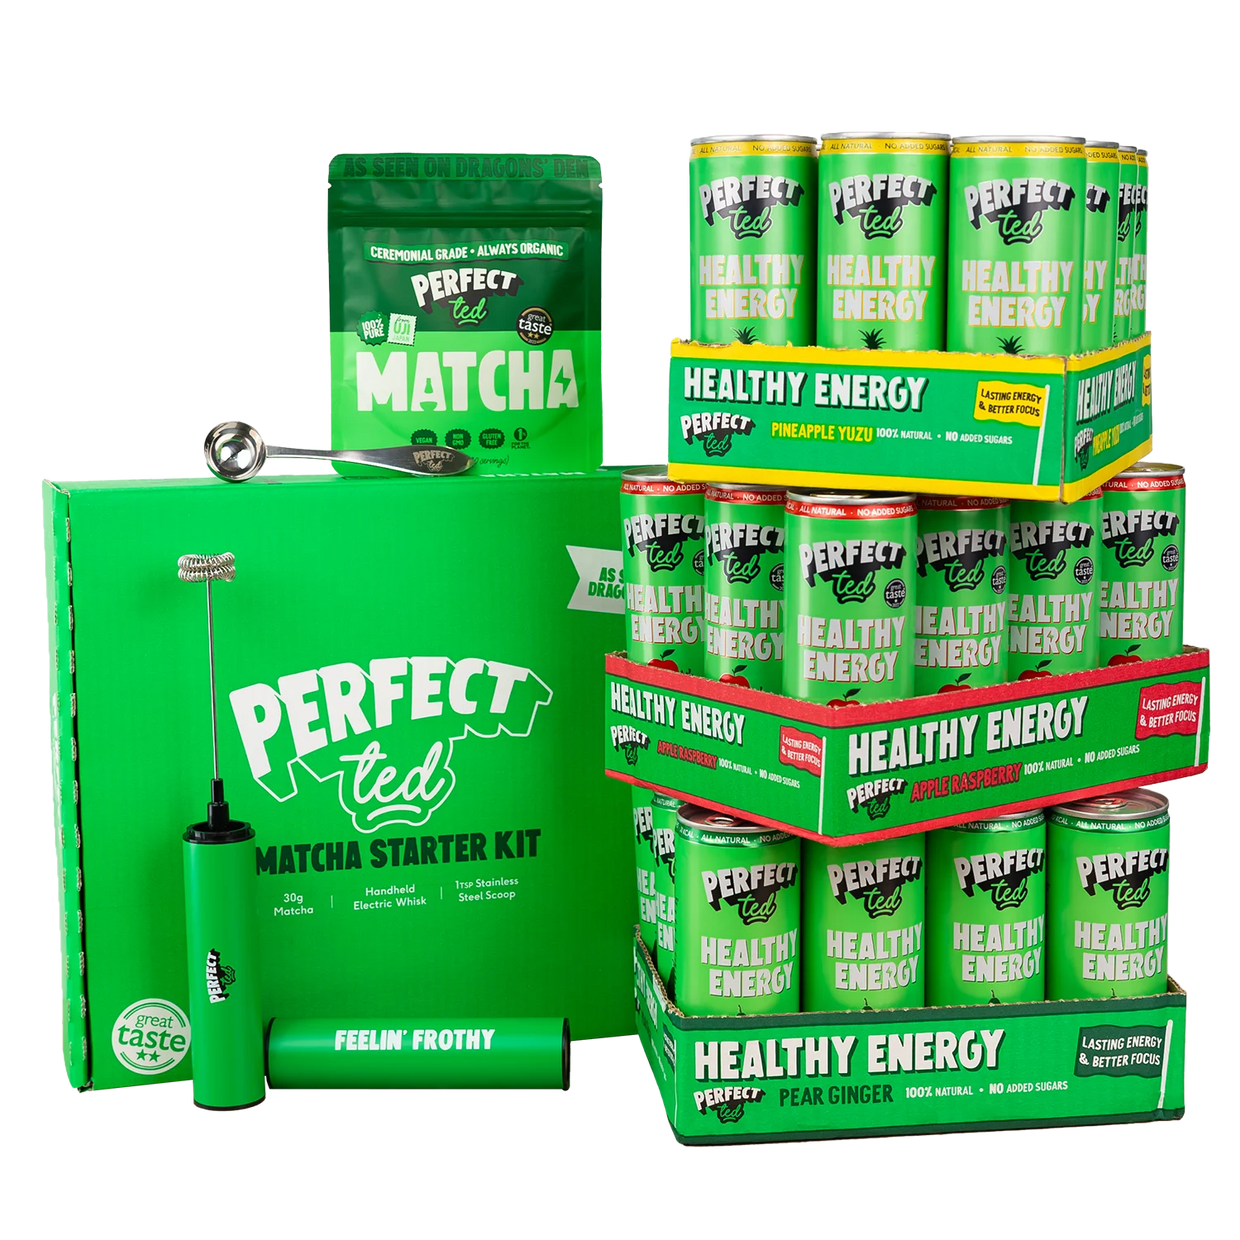 Our modern matcha starter kit and 12 pack of each flavour of energy drink